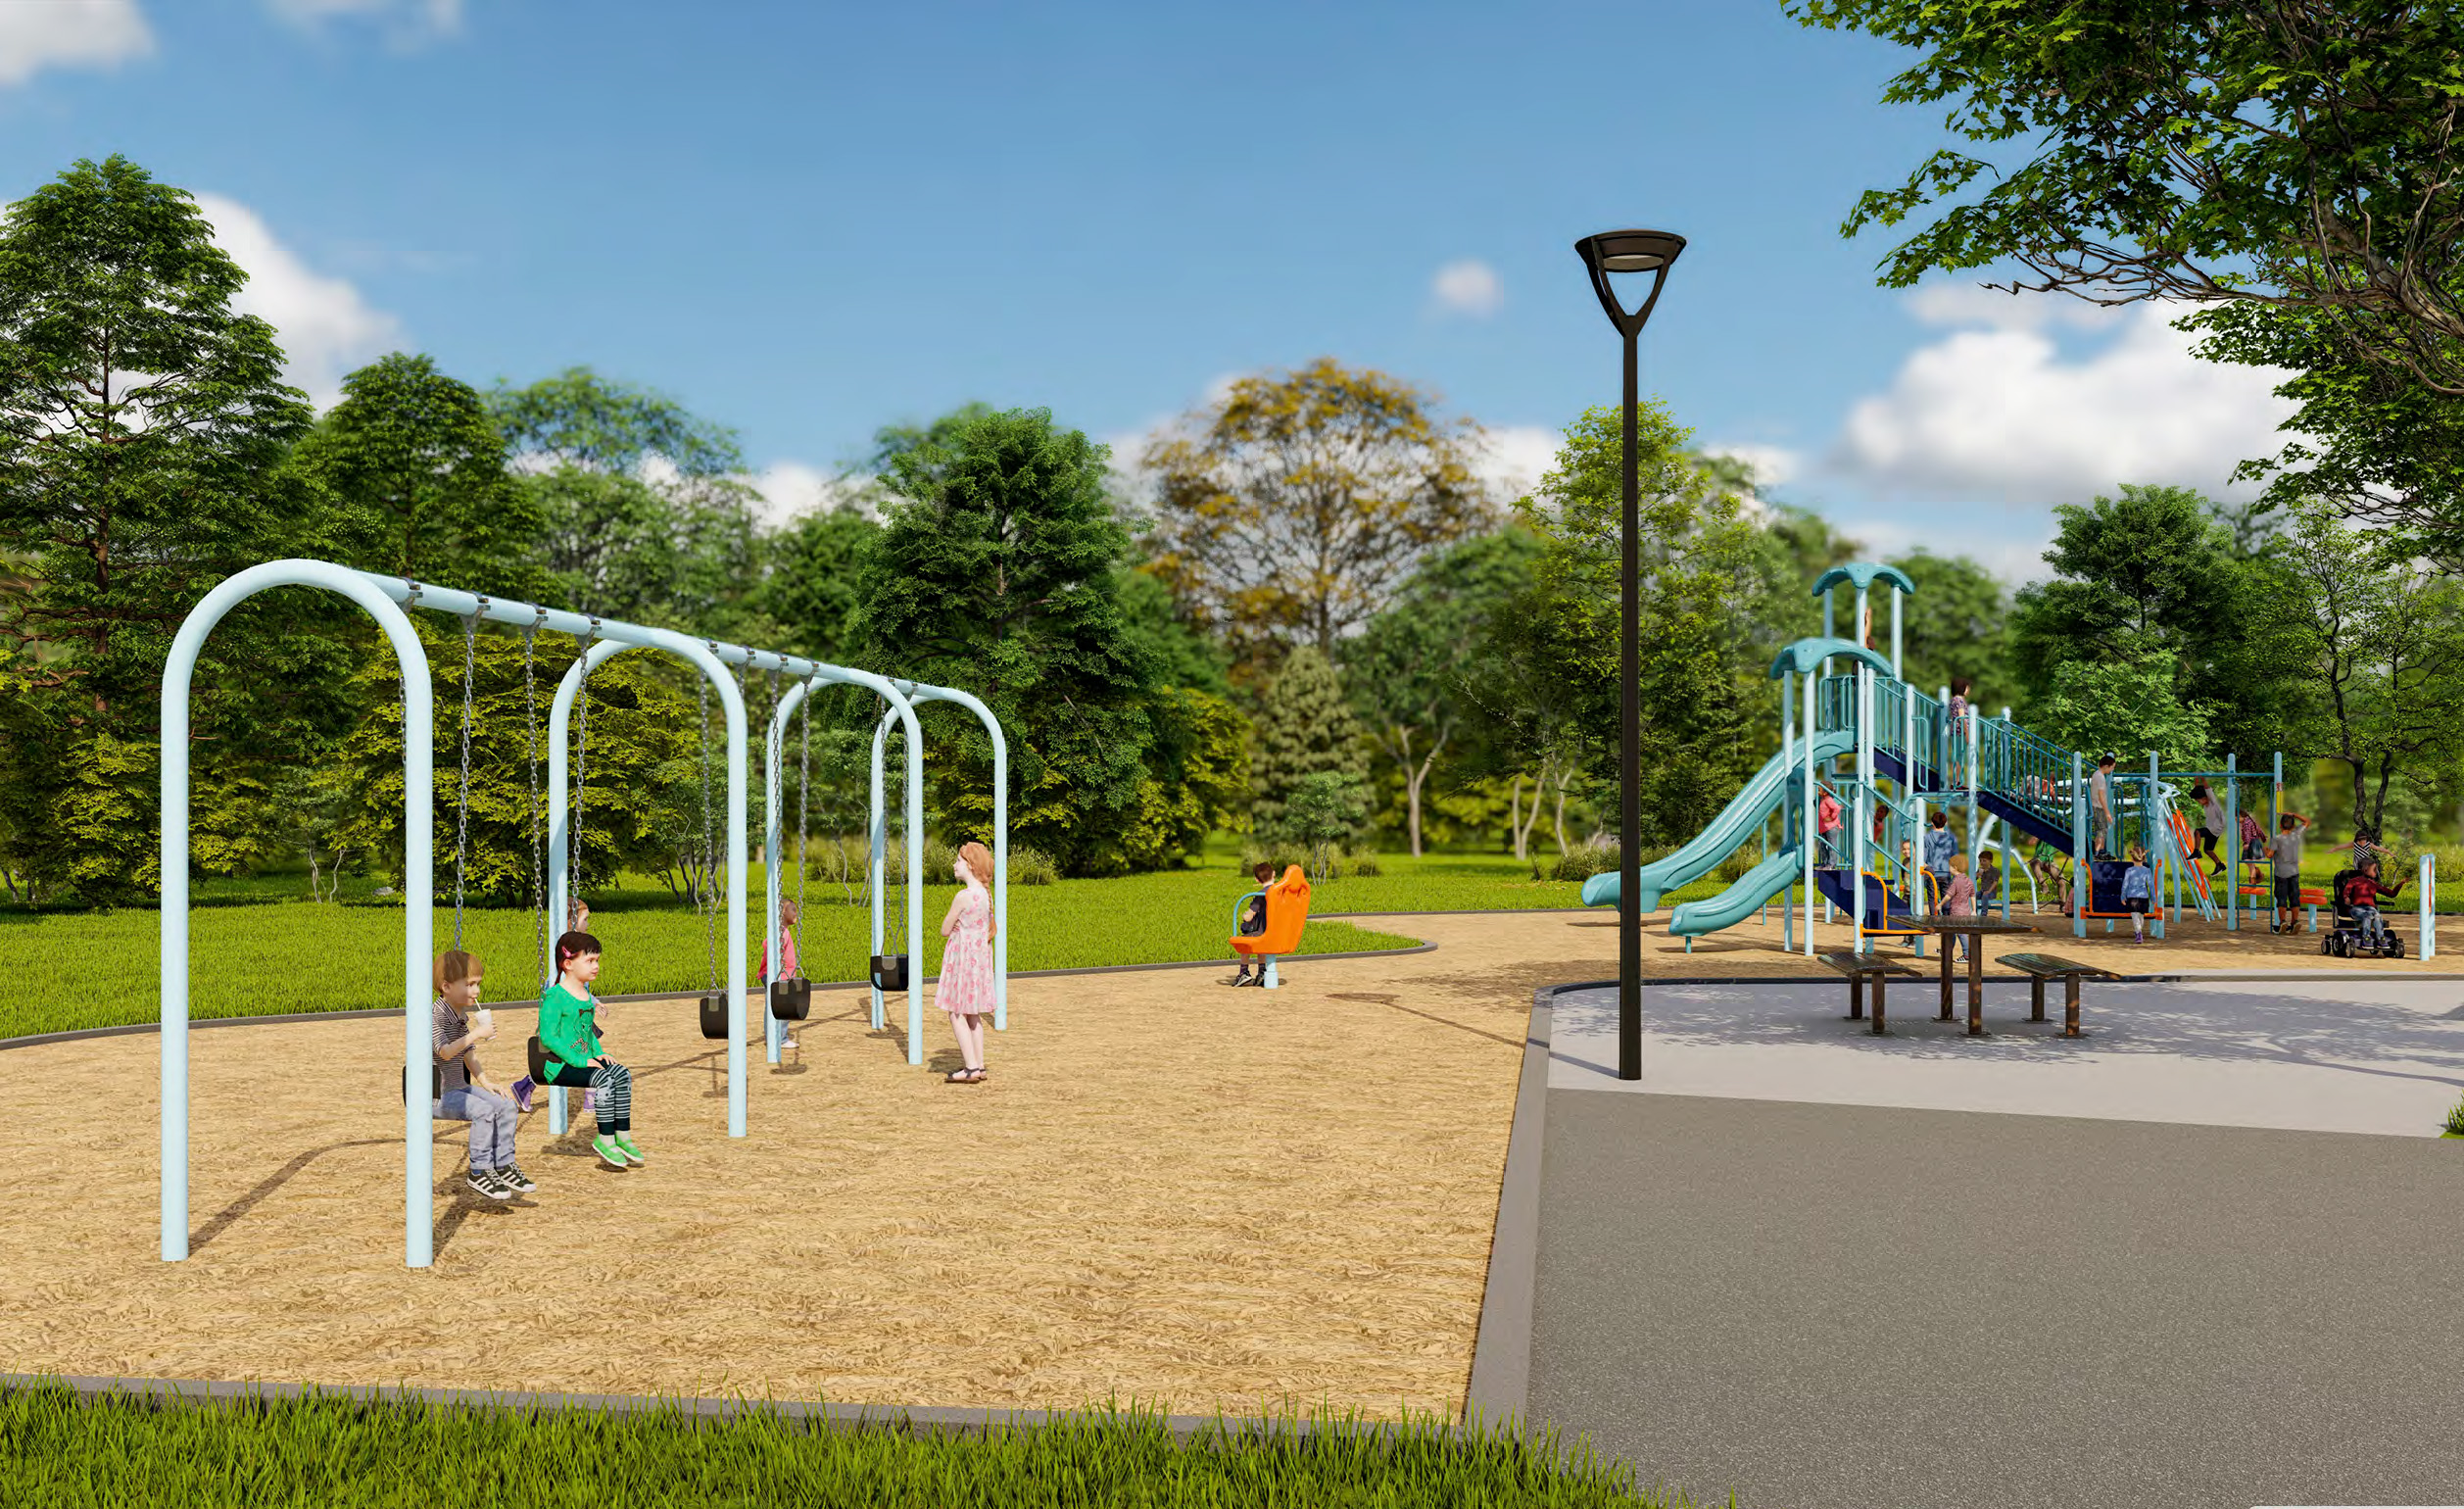 A rendering of playground Design A. From left to right: swings, spinner seat, junior play structure, senior play structure. There is a picnic table displayed. Design is further described following the image.